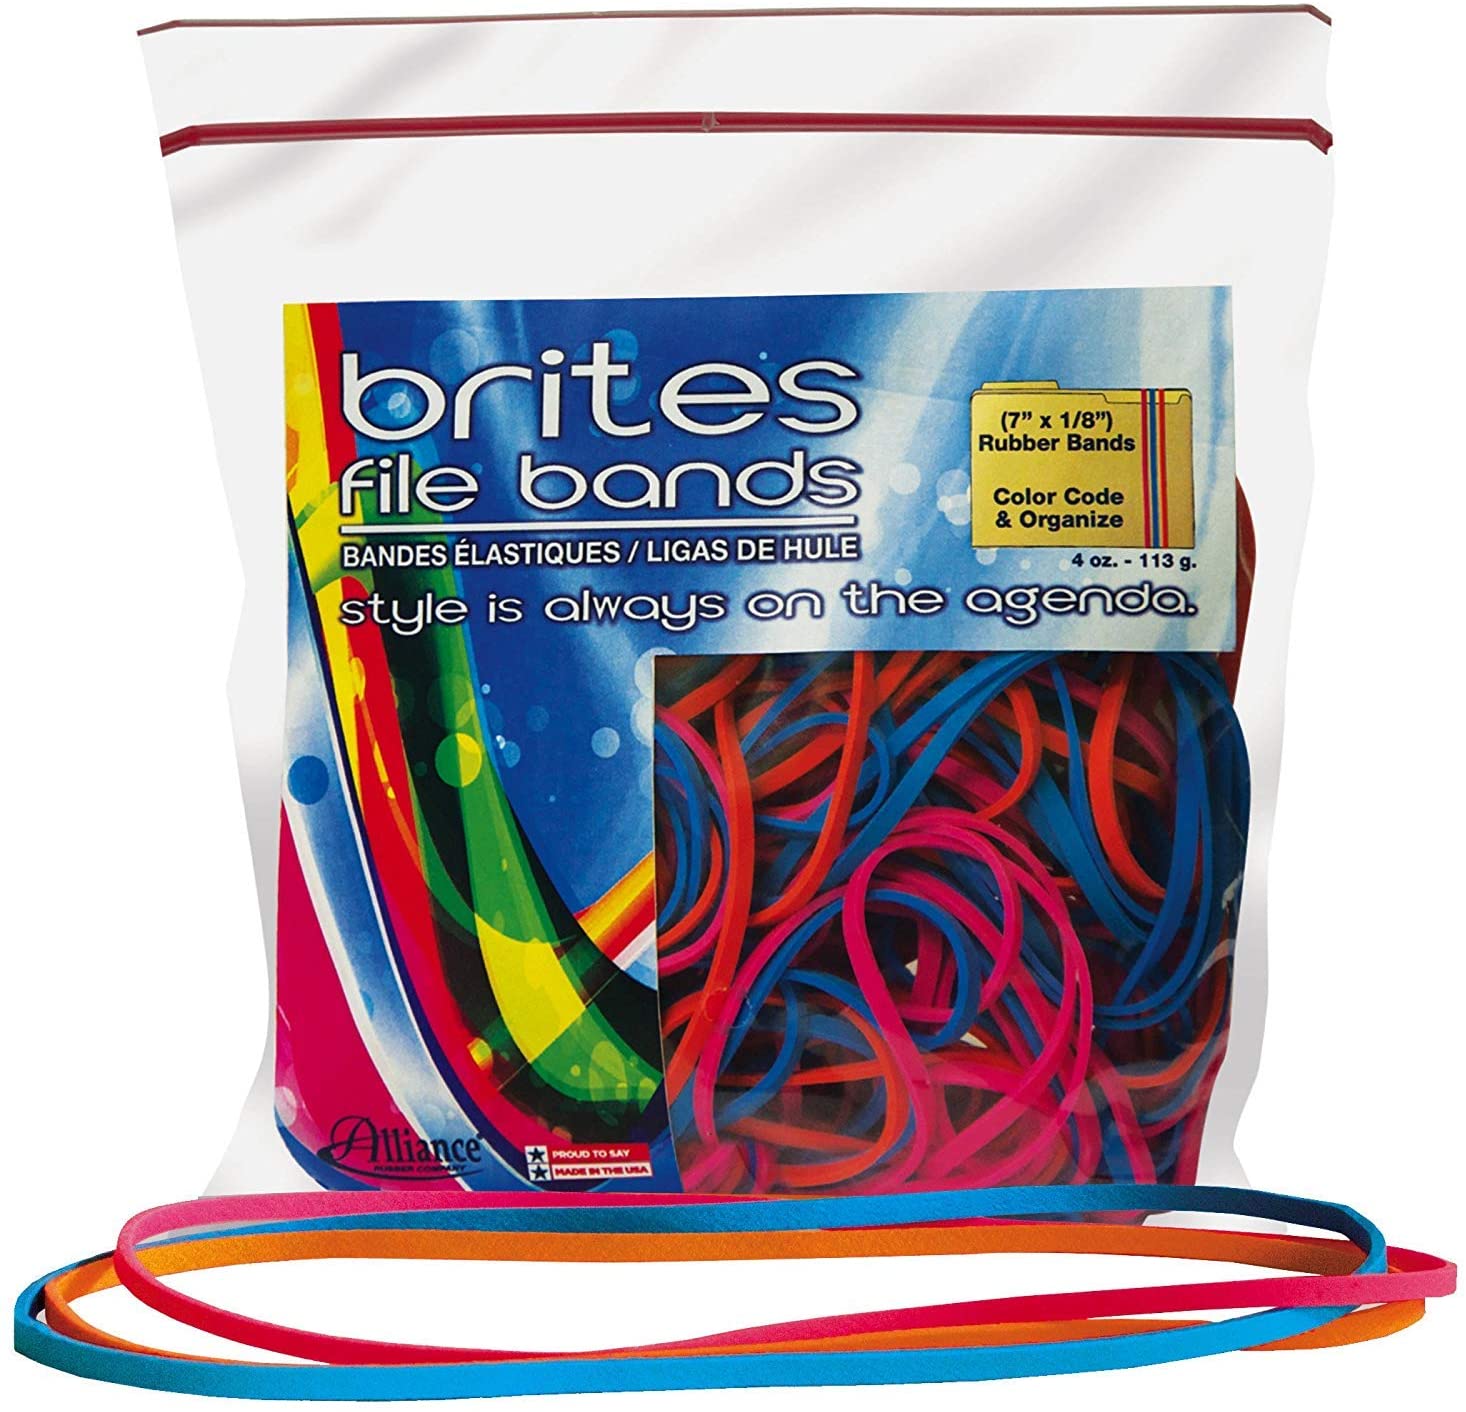 ''Alliance RUBBER 07800 Non-Latex Brites File BANDS, Colored Elastic BANDS, 200-Count (7'''' x 1/8'''', A